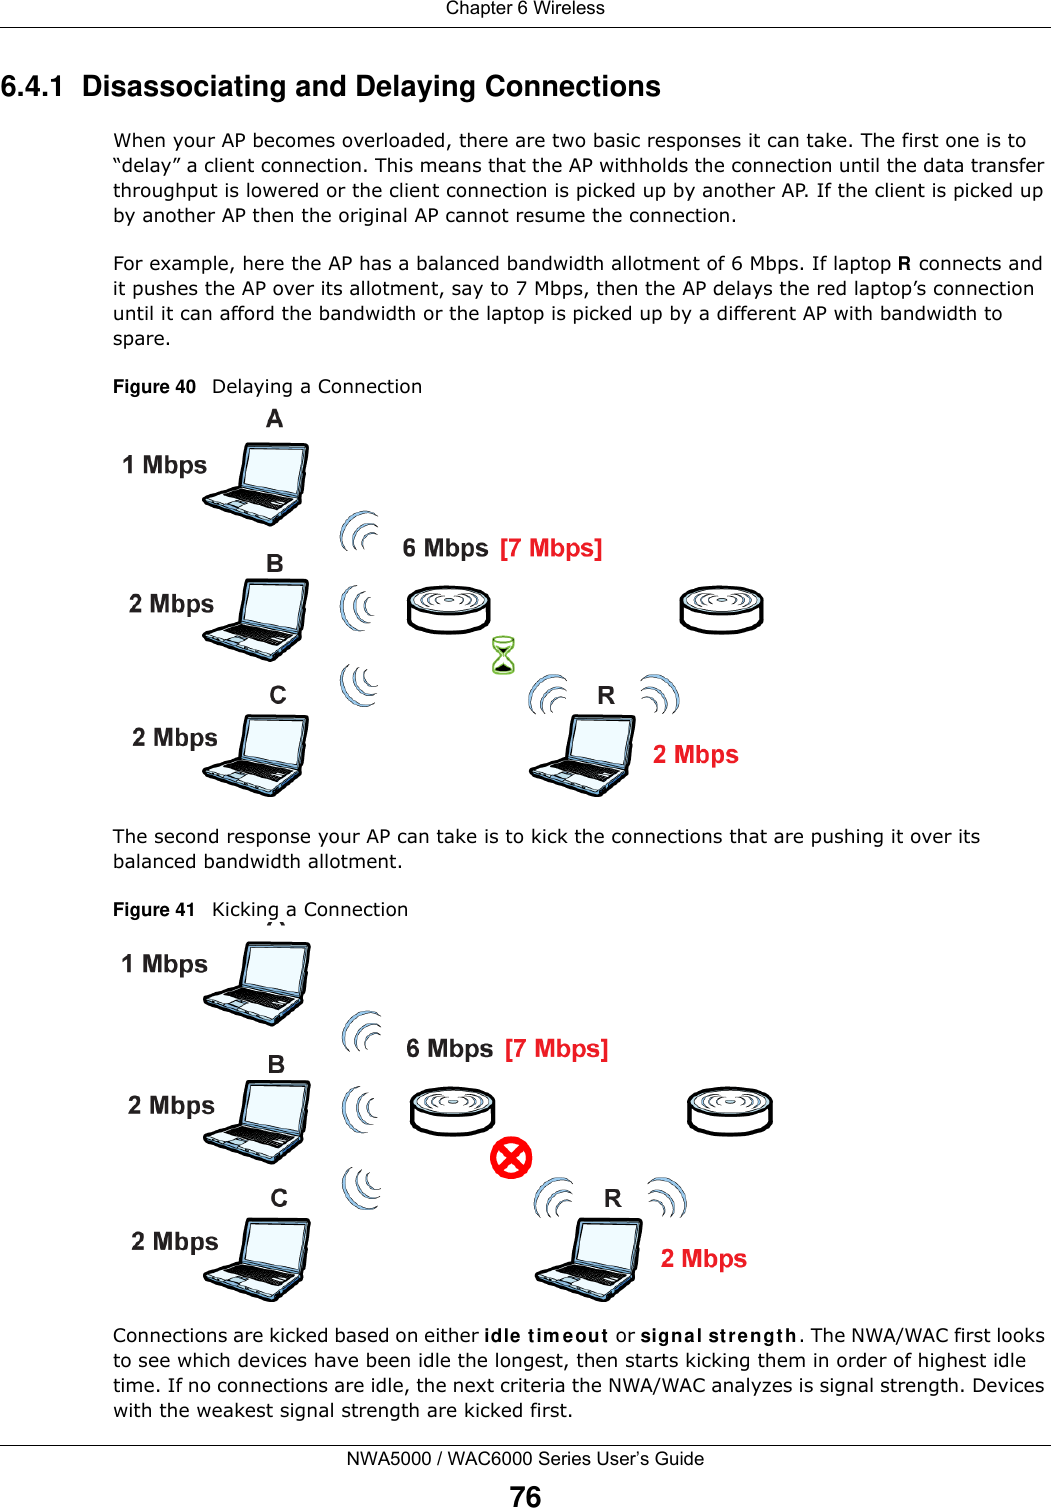 Chapter 6 WirelessNWA5000 / WAC6000 Series User’s Guide766.4.1  Disassociating and Delaying ConnectionsWhen your AP becomes overloaded, there are two basic responses it can take. The first one is to “delay” a client connection. This means that the AP withholds the connection until the data transfer throughput is lowered or the client connection is picked up by another AP. If the client is picked up by another AP then the original AP cannot resume the connection.For example, here the AP has a balanced bandwidth allotment of 6 Mbps. If laptop R connects and it pushes the AP over its allotment, say to 7 Mbps, then the AP delays the red laptop’s connection until it can afford the bandwidth or the laptop is picked up by a different AP with bandwidth to spare.Figure 40   Delaying a ConnectionThe second response your AP can take is to kick the connections that are pushing it over its balanced bandwidth allotment.Figure 41   Kicking a ConnectionConnections are kicked based on either idle timeout or signal strength. The NWA/WAC first looks to see which devices have been idle the longest, then starts kicking them in order of highest idle time. If no connections are idle, the next criteria the NWA/WAC analyzes is signal strength. Devices with the weakest signal strength are kicked first.